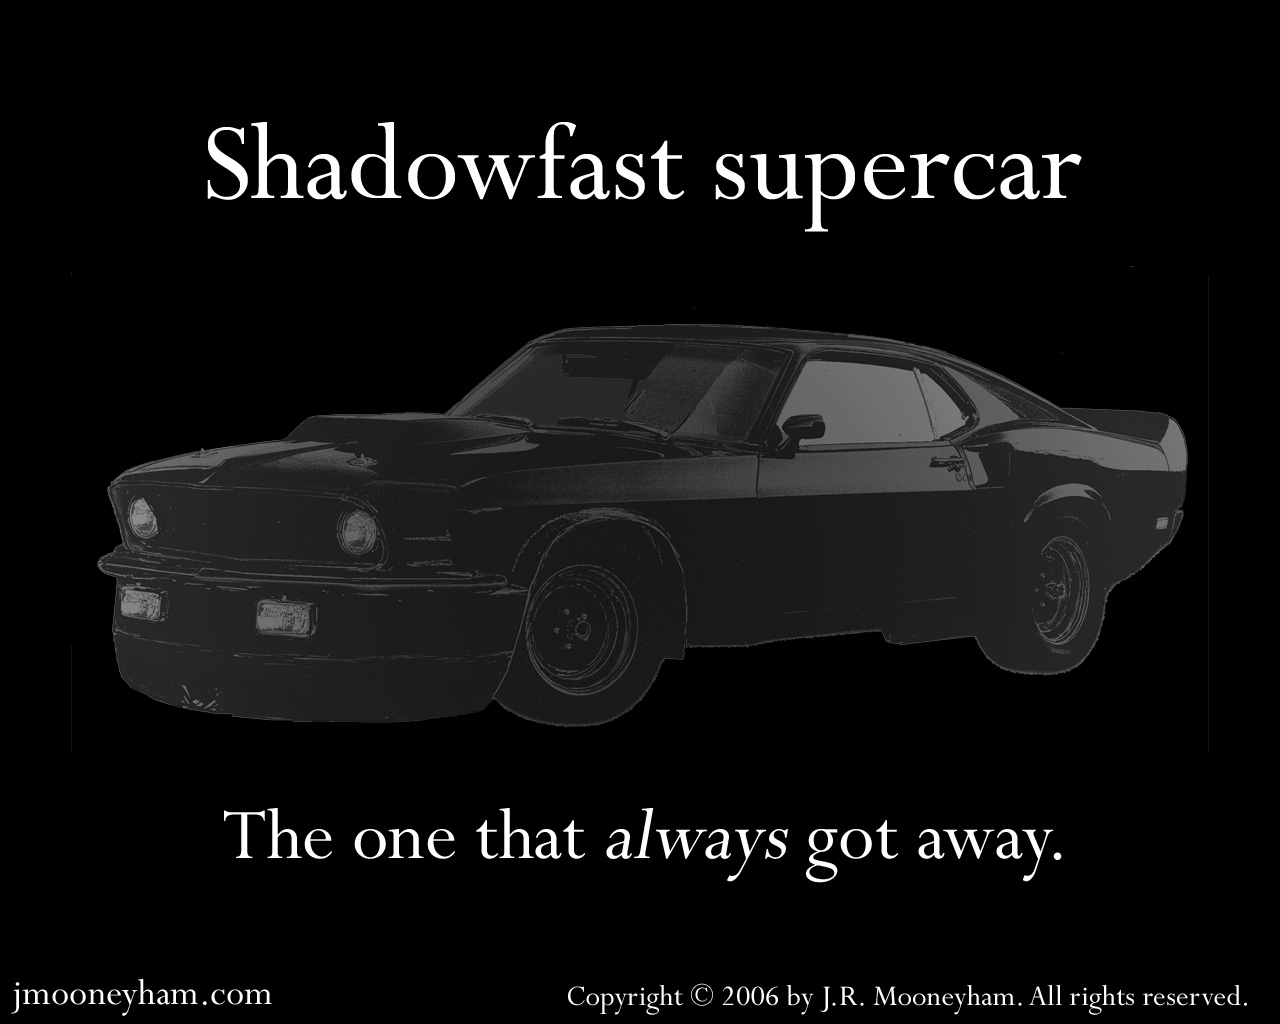 Free 1280x1024 jpeg desktop wallpaper (The ultimate Mustang supercar poster the one that always got away)